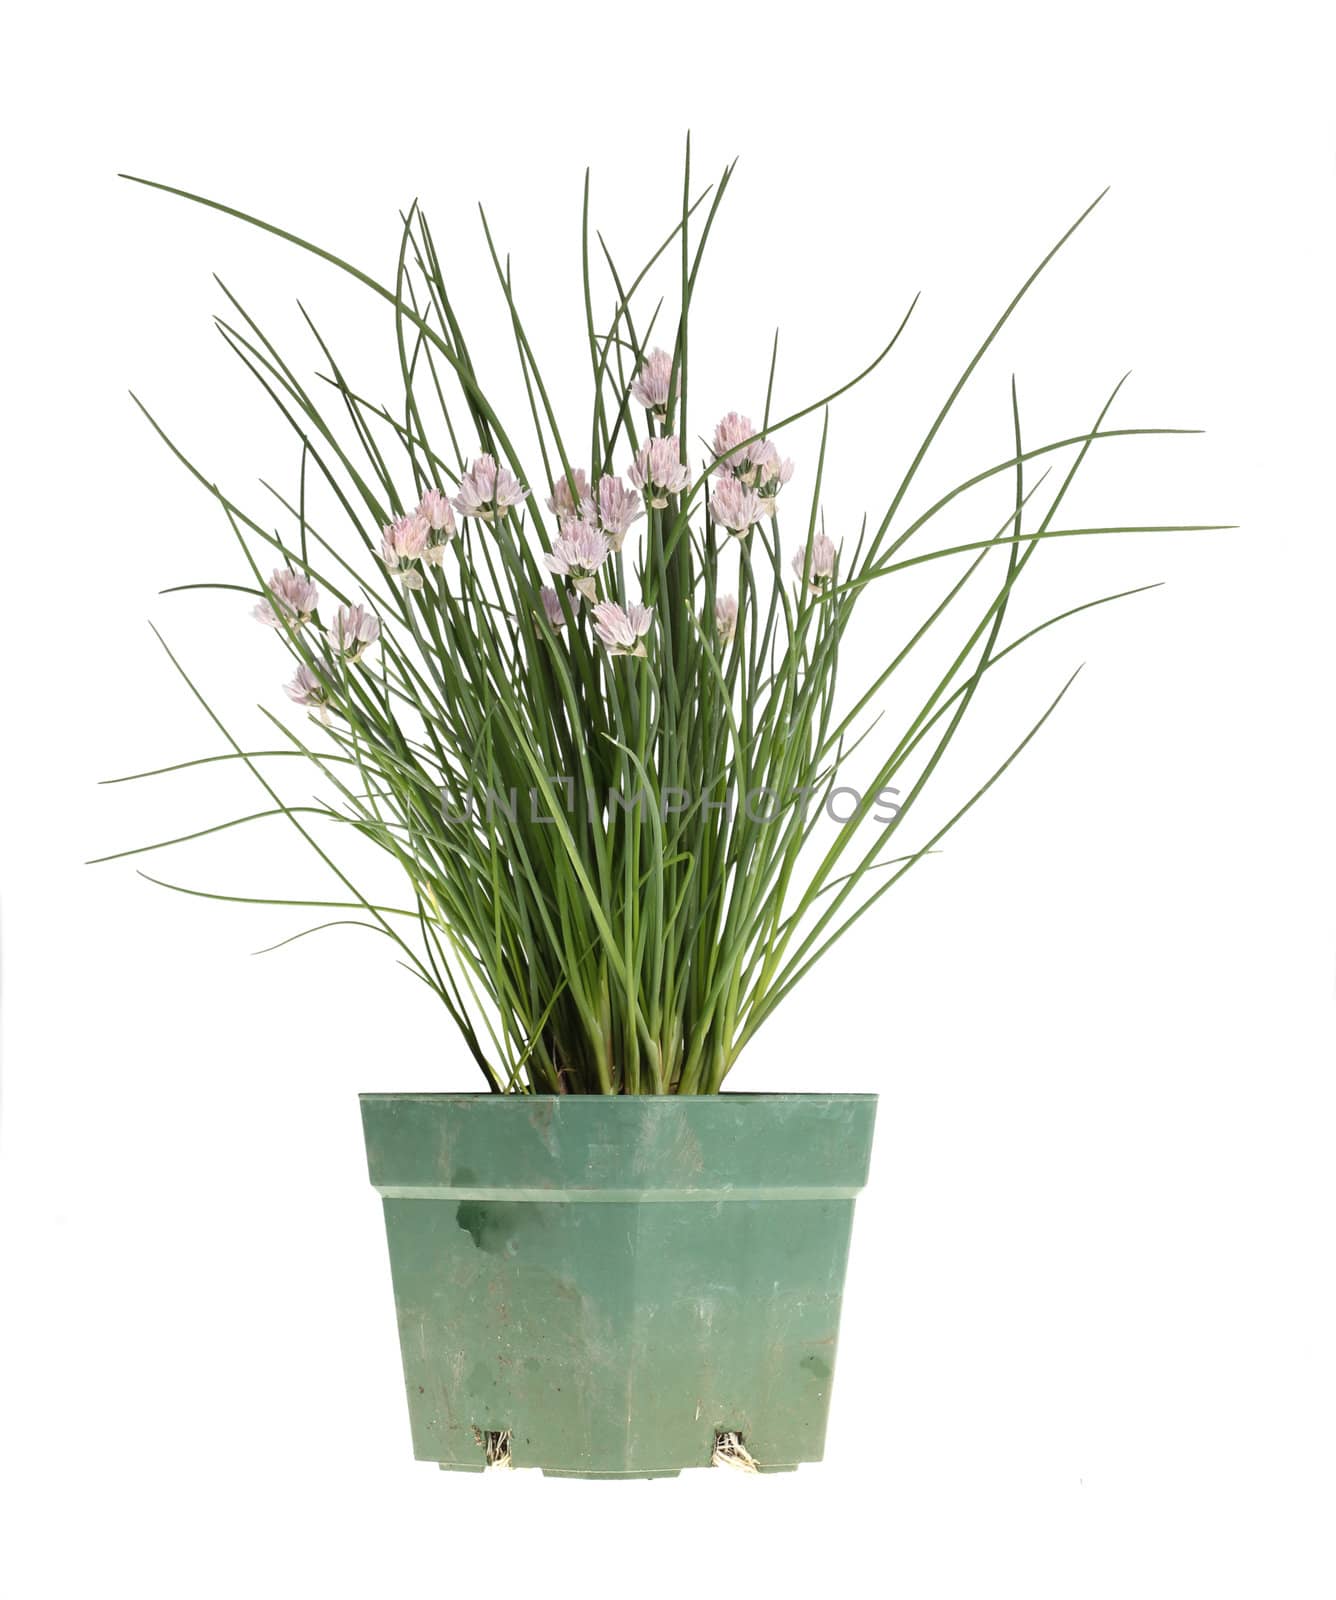 Clump of chives (Allium schoenoprasum) with purple flowers in a dirty green plastic pot